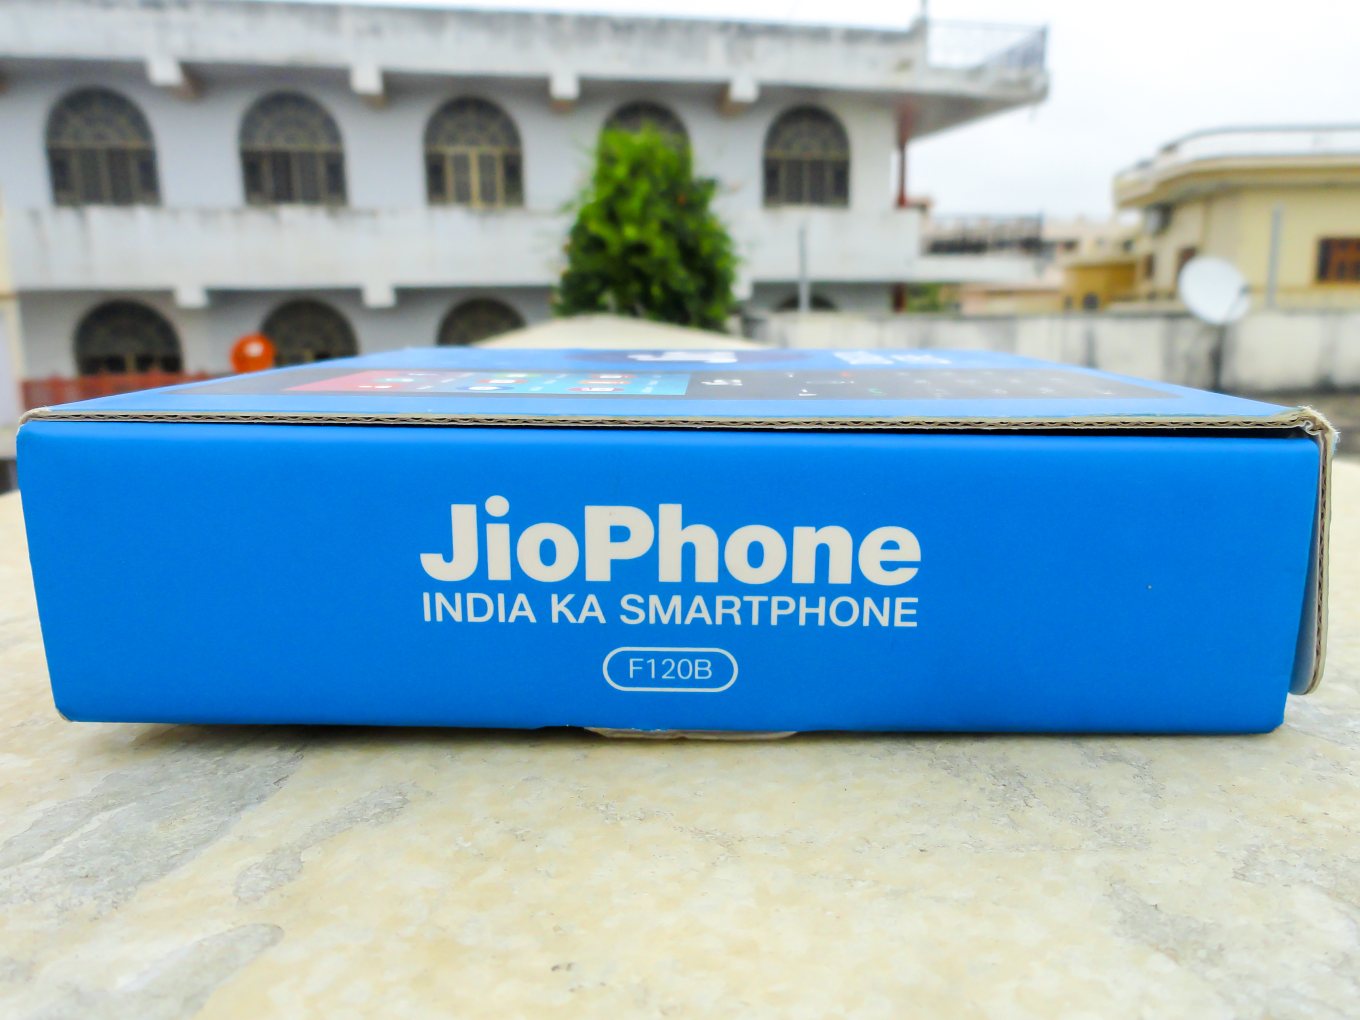 Reliance Jio To Roll Out 5G Enabled Smartphones Priced At INR 5K